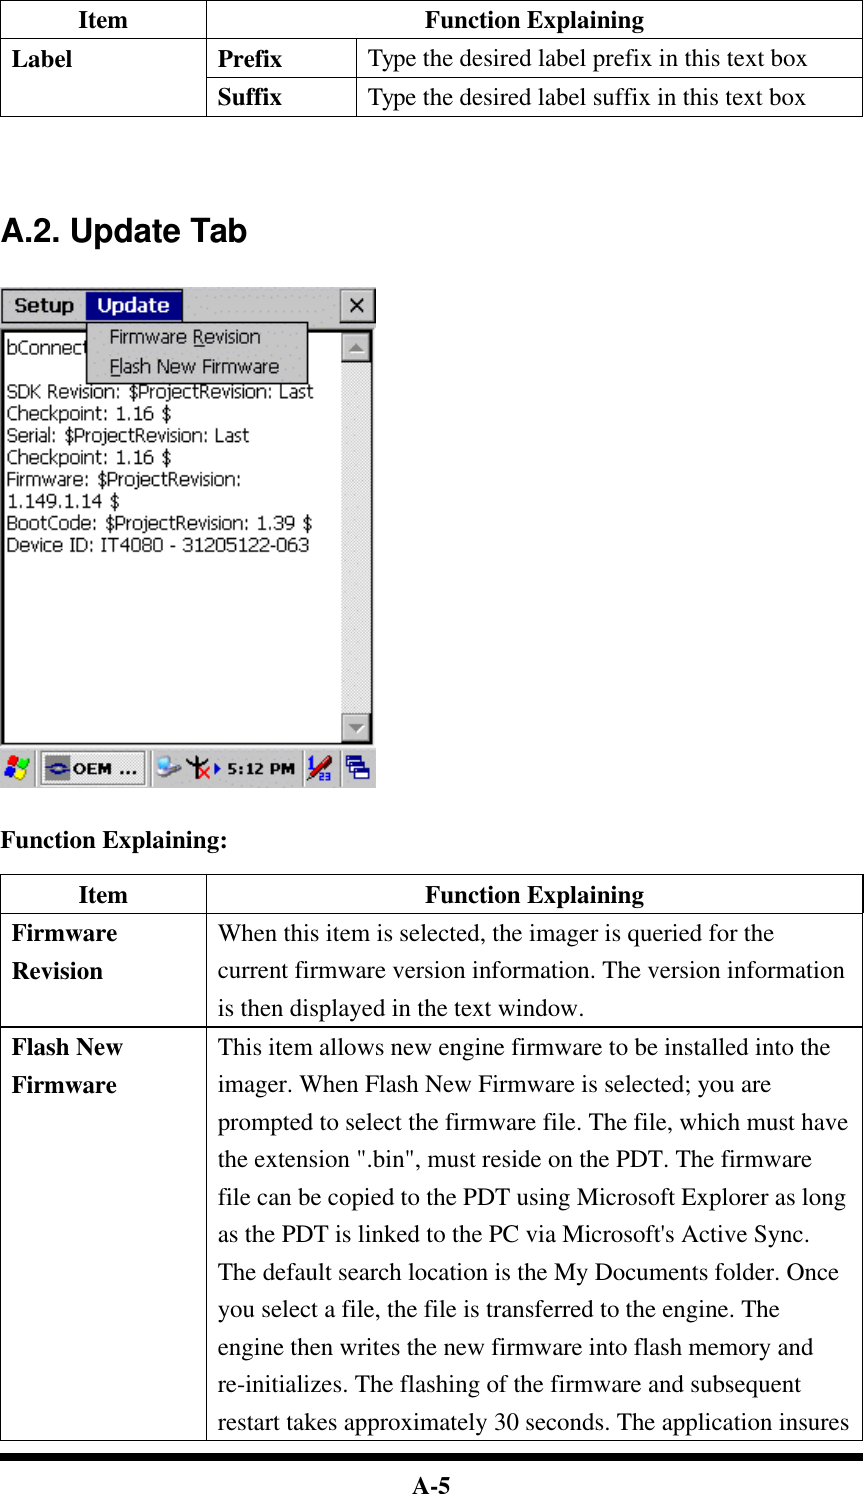  A-5 Item Function Explaining Prefix Type the desired label prefix in this text box Label Suffix Type the desired label suffix in this text box     A.2. Update Tab     Function Explaining:  Item Function Explaining Firmware Revision When this item is selected, the imager is queried for the current firmware version information. The version information is then displayed in the text window. Flash New Firmware This item allows new engine firmware to be installed into the imager. When Flash New Firmware is selected; you are prompted to select the firmware file. The file, which must have the extension &quot;.bin&quot;, must reside on the PDT. The firmware file can be copied to the PDT using Microsoft Explorer as long as the PDT is linked to the PC via Microsoft&apos;s Active Sync. The default search location is the My Documents folder. Once you select a file, the file is transferred to the engine. The engine then writes the new firmware into flash memory and re-initializes. The flashing of the firmware and subsequent restart takes approximately 30 seconds. The application insures 